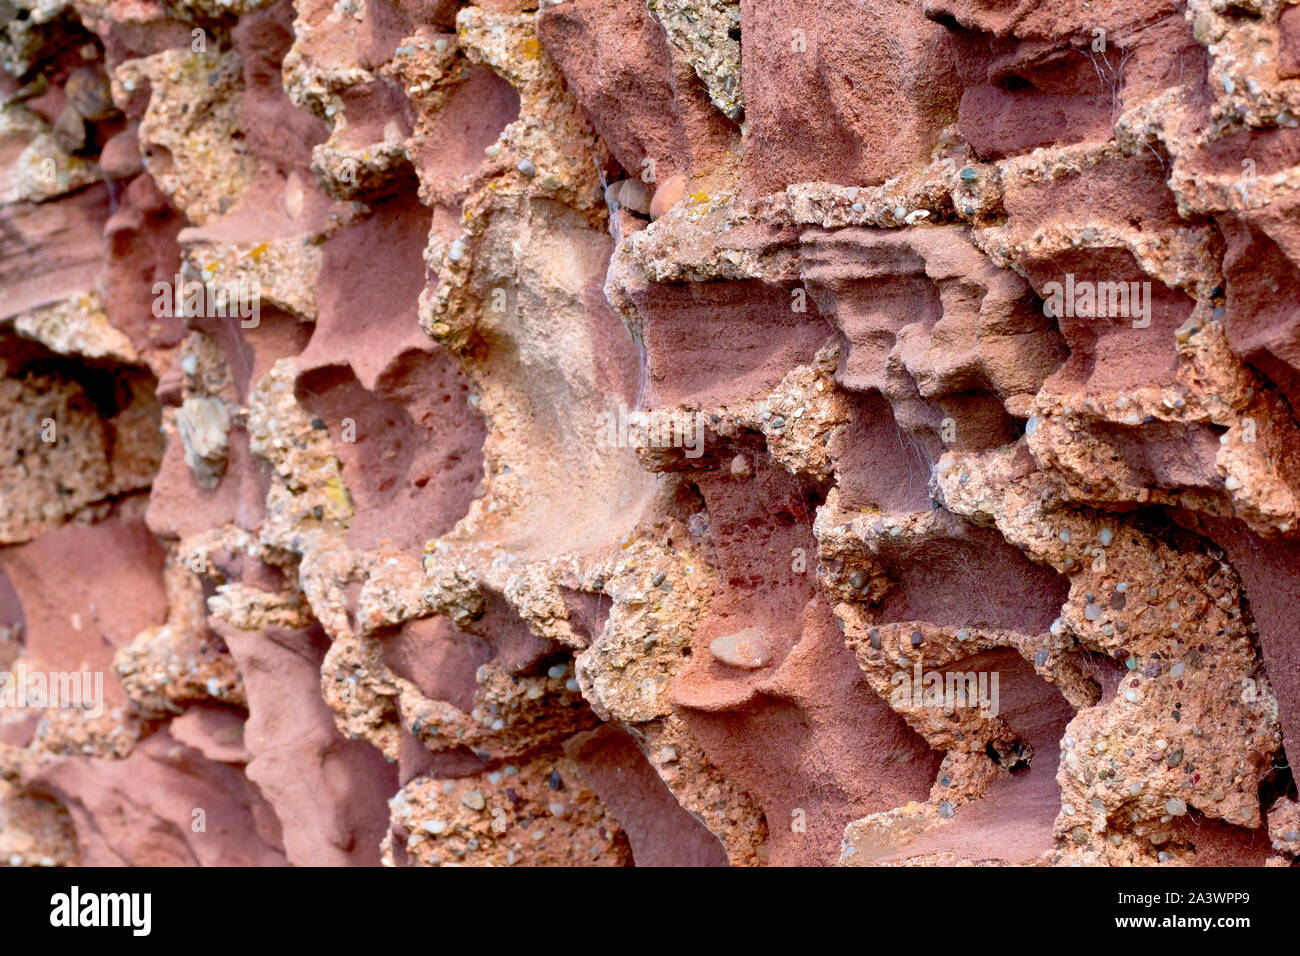 An abstract image of an old wall, where the soft red sandstone blocks have been eroding away faster than the harder concrete mortar. Stock Photo